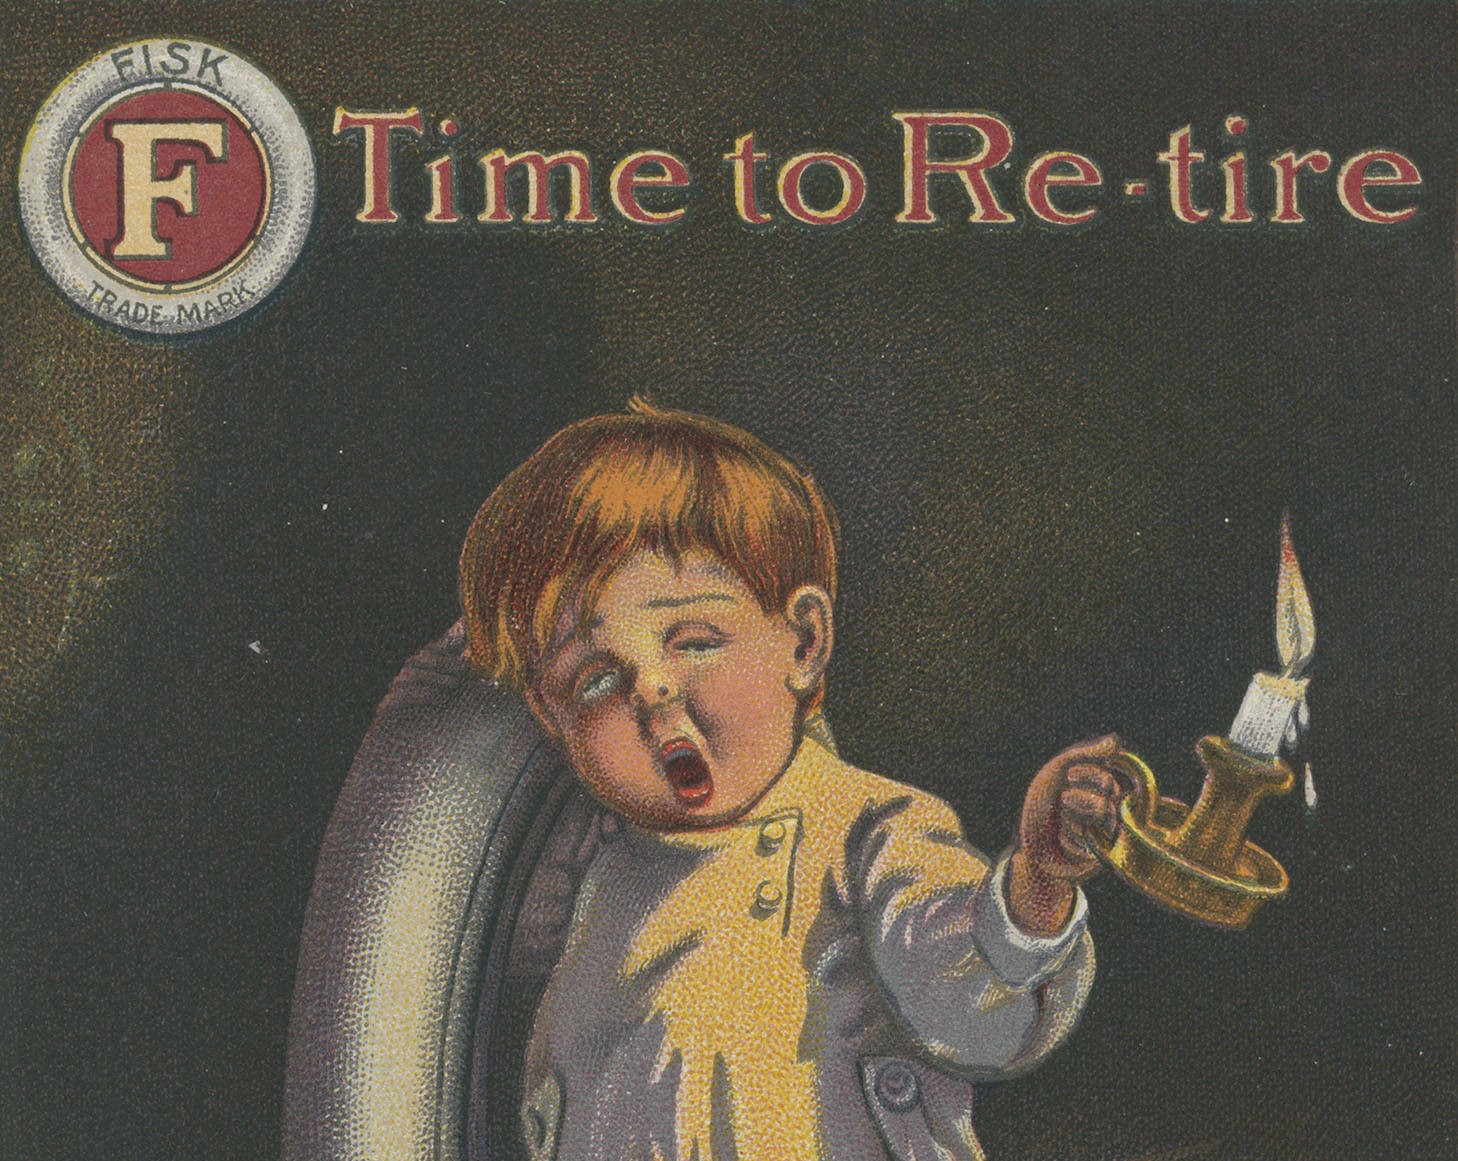 Above is portion of a postcard that shows an ad and slogan for retreading services by Fisk Tires. (Wikimedia Commons/Digital Public Library of America, via Ohio Digital Network/Toledo-Lucas County Public Library)